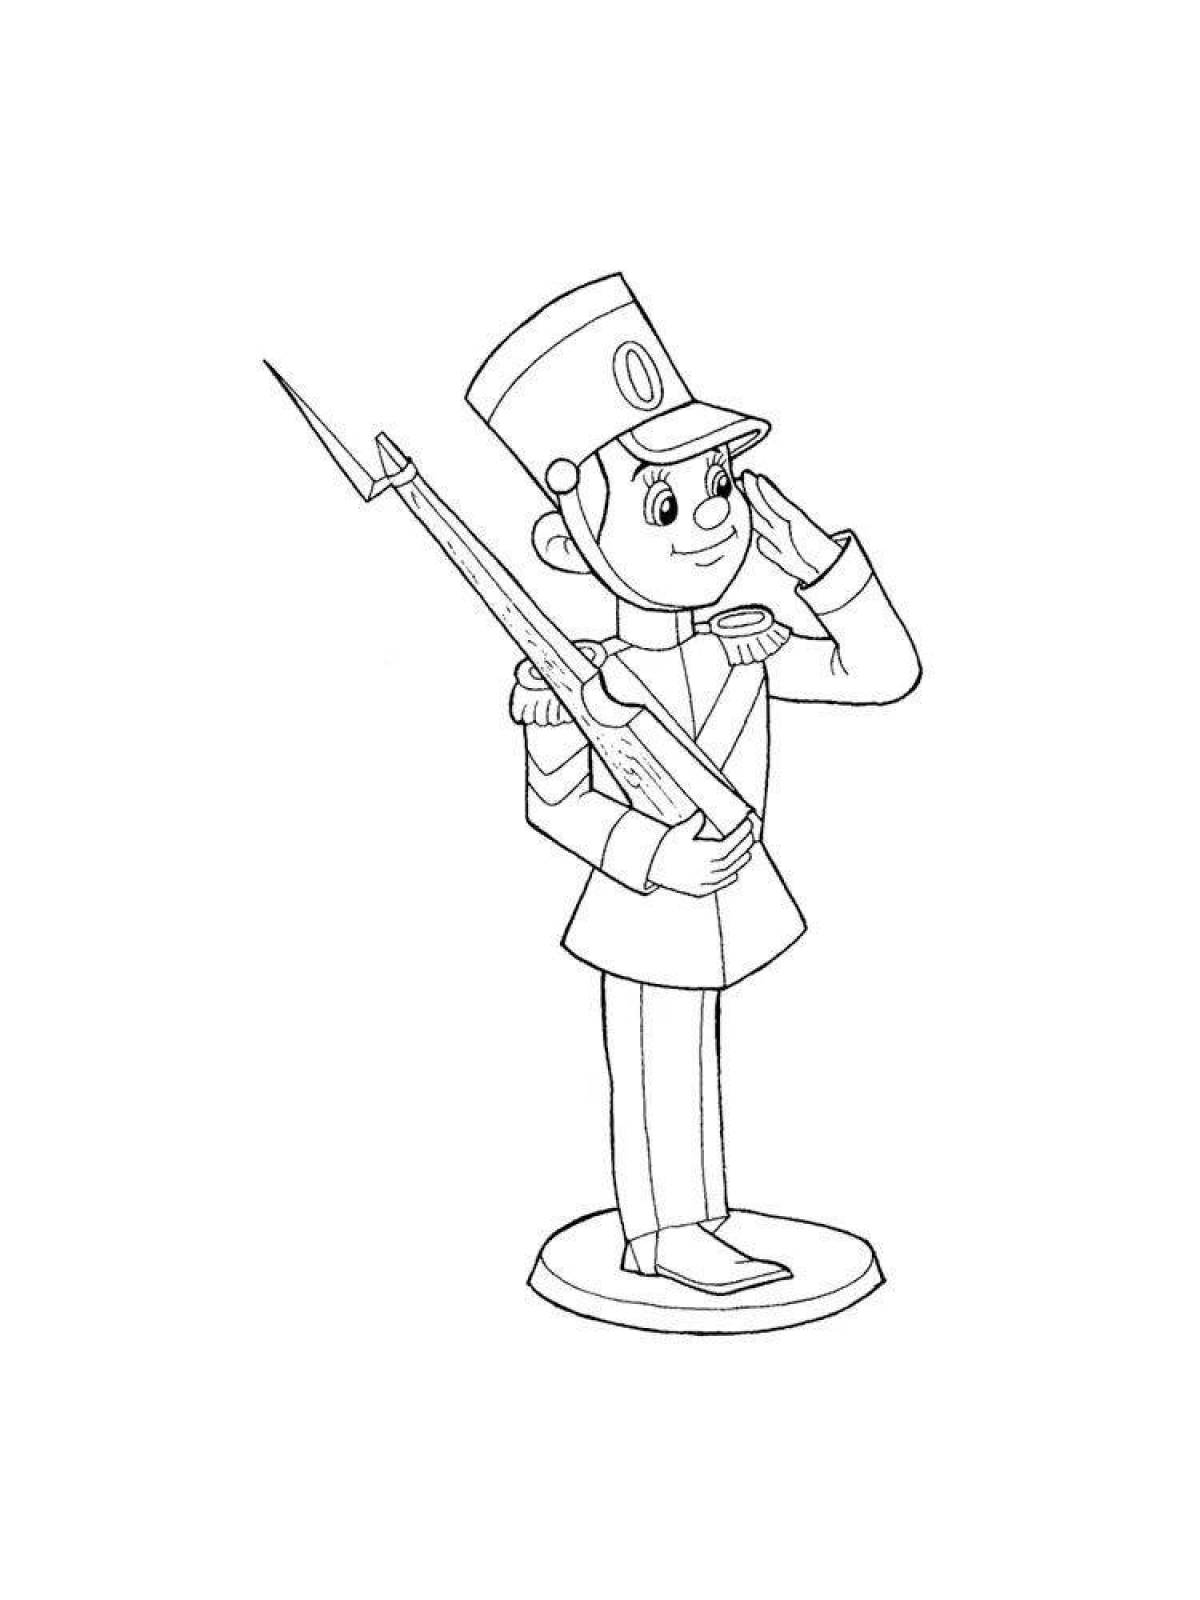 Adorable Tin Soldier Coloring Page